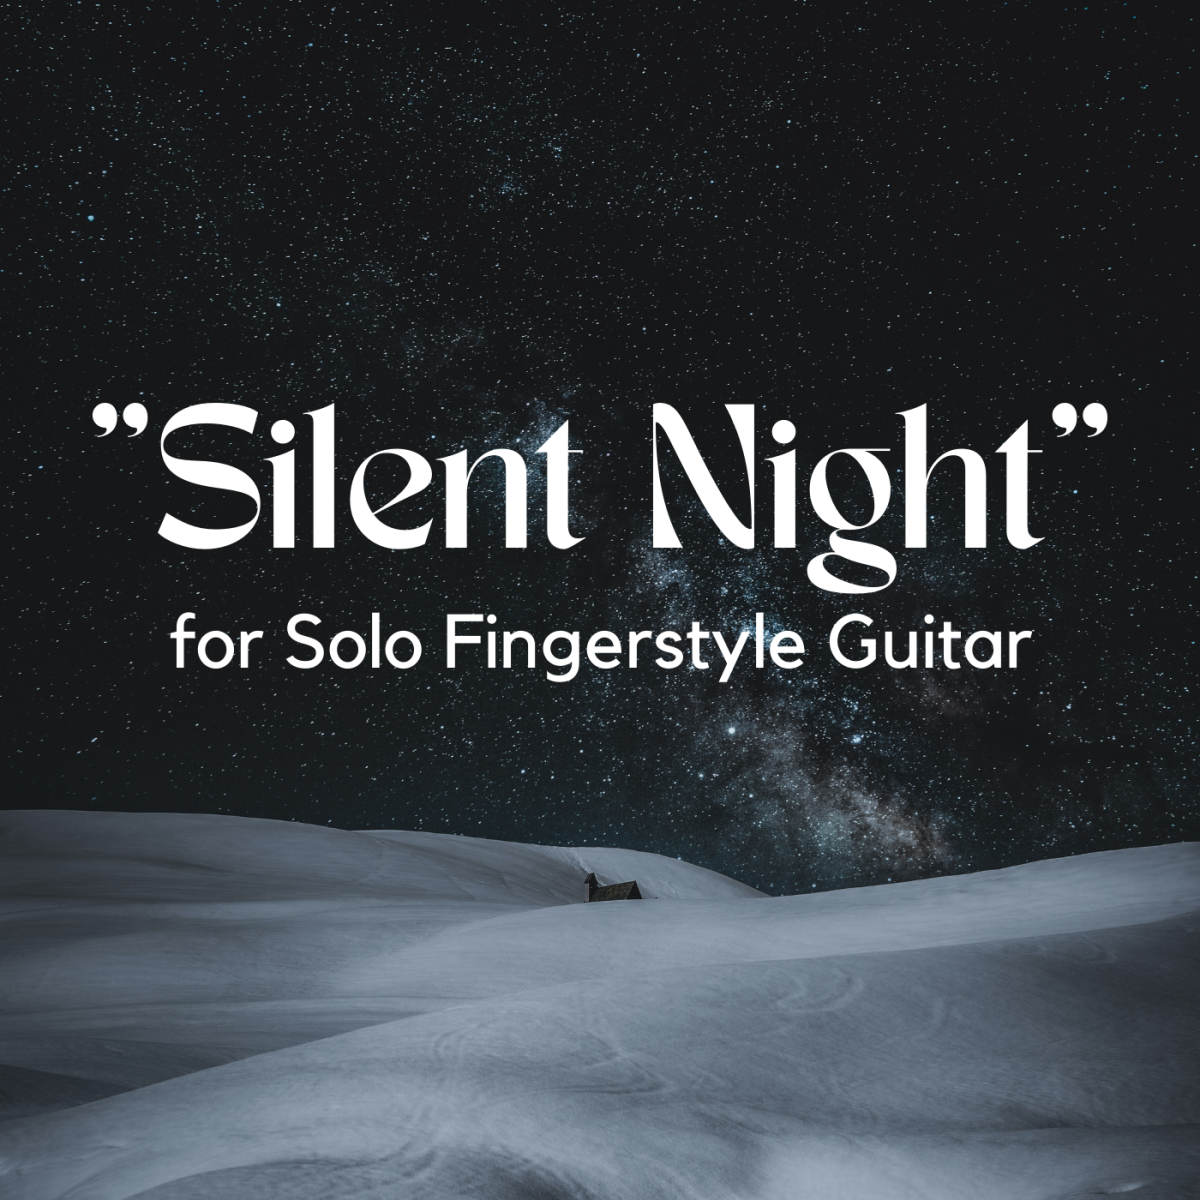 Learn how to play "Silent Night" on guitar.